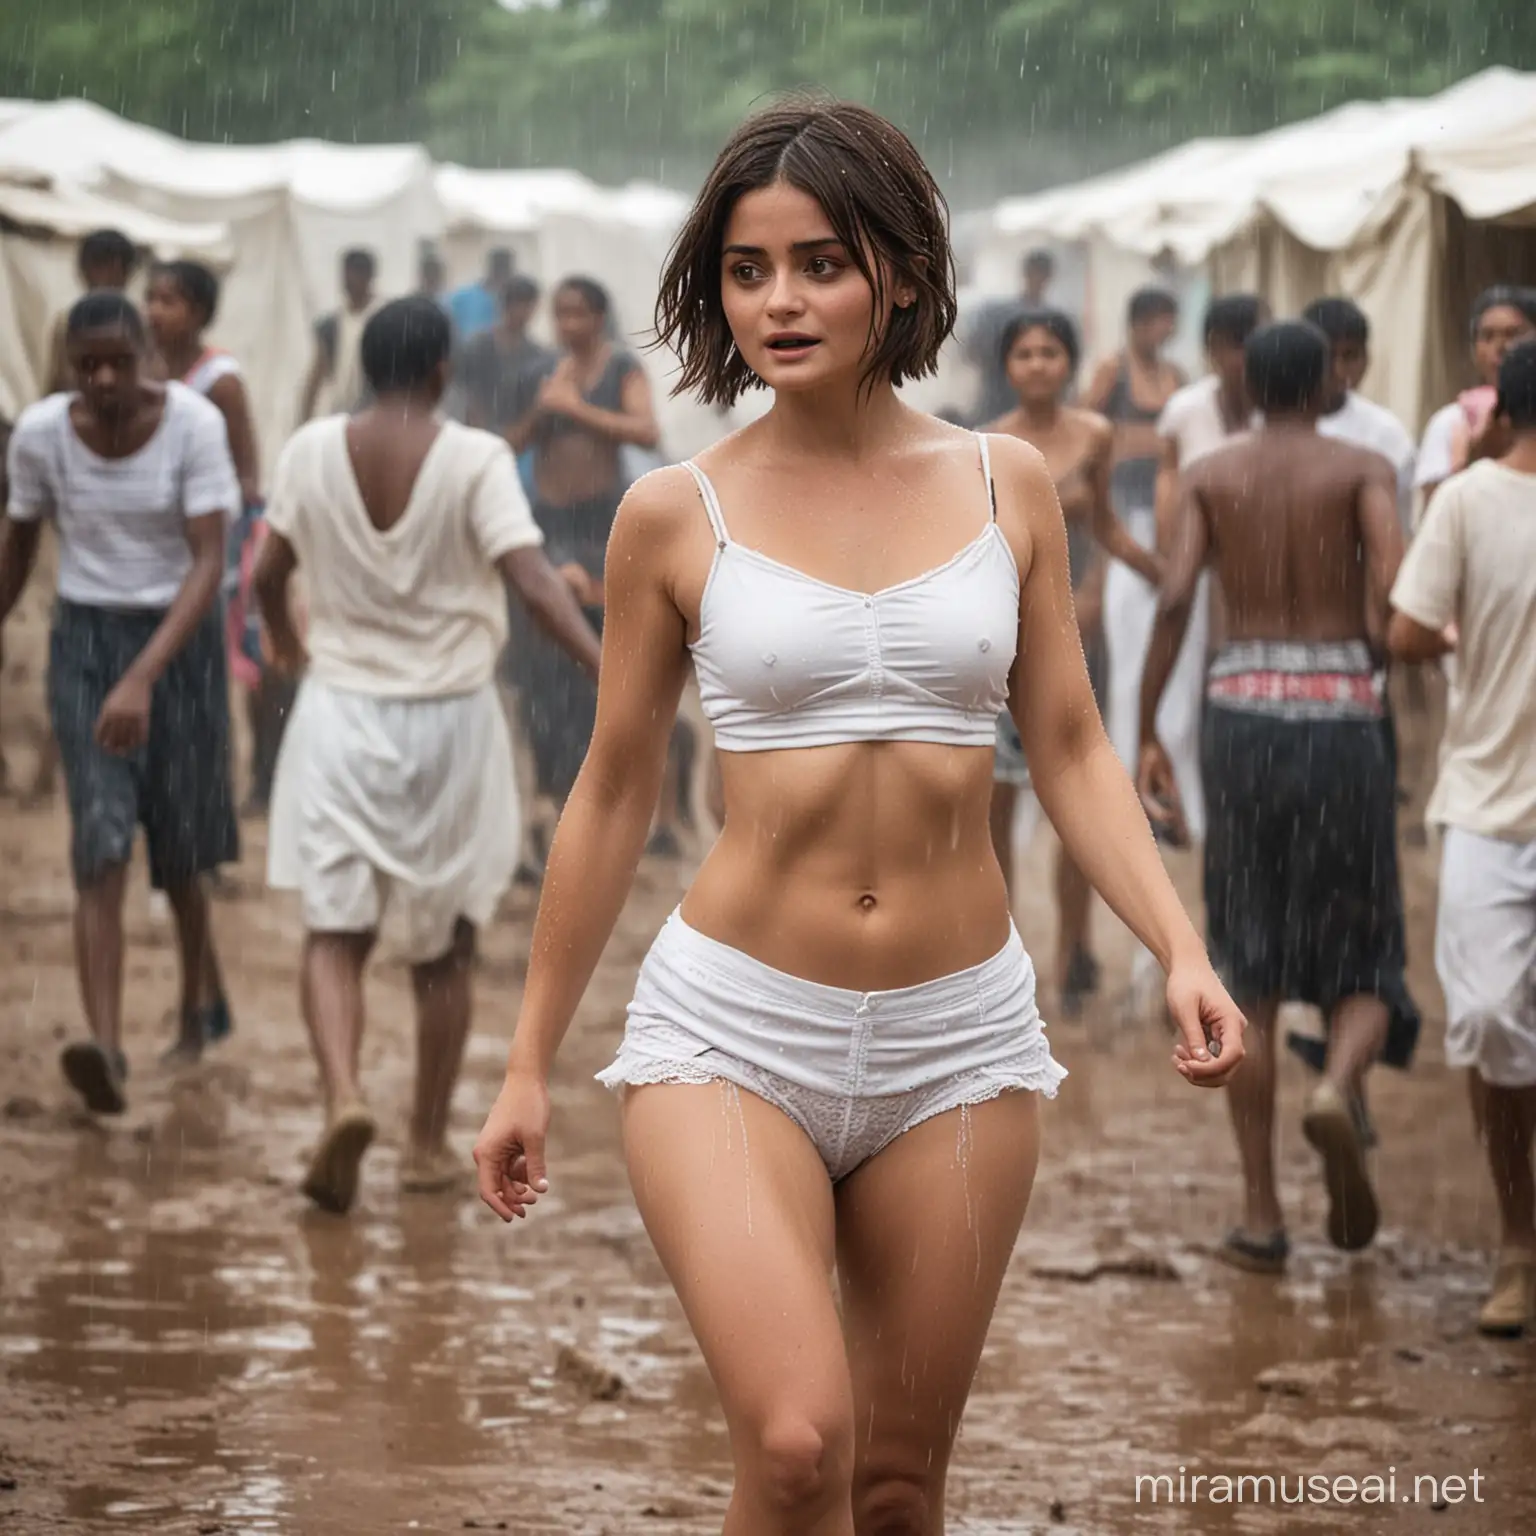 Jenna Coleman with short bobbed hair, wearing wite panties, dancing with legs apart, in a crowded refugee camp. It is raining.